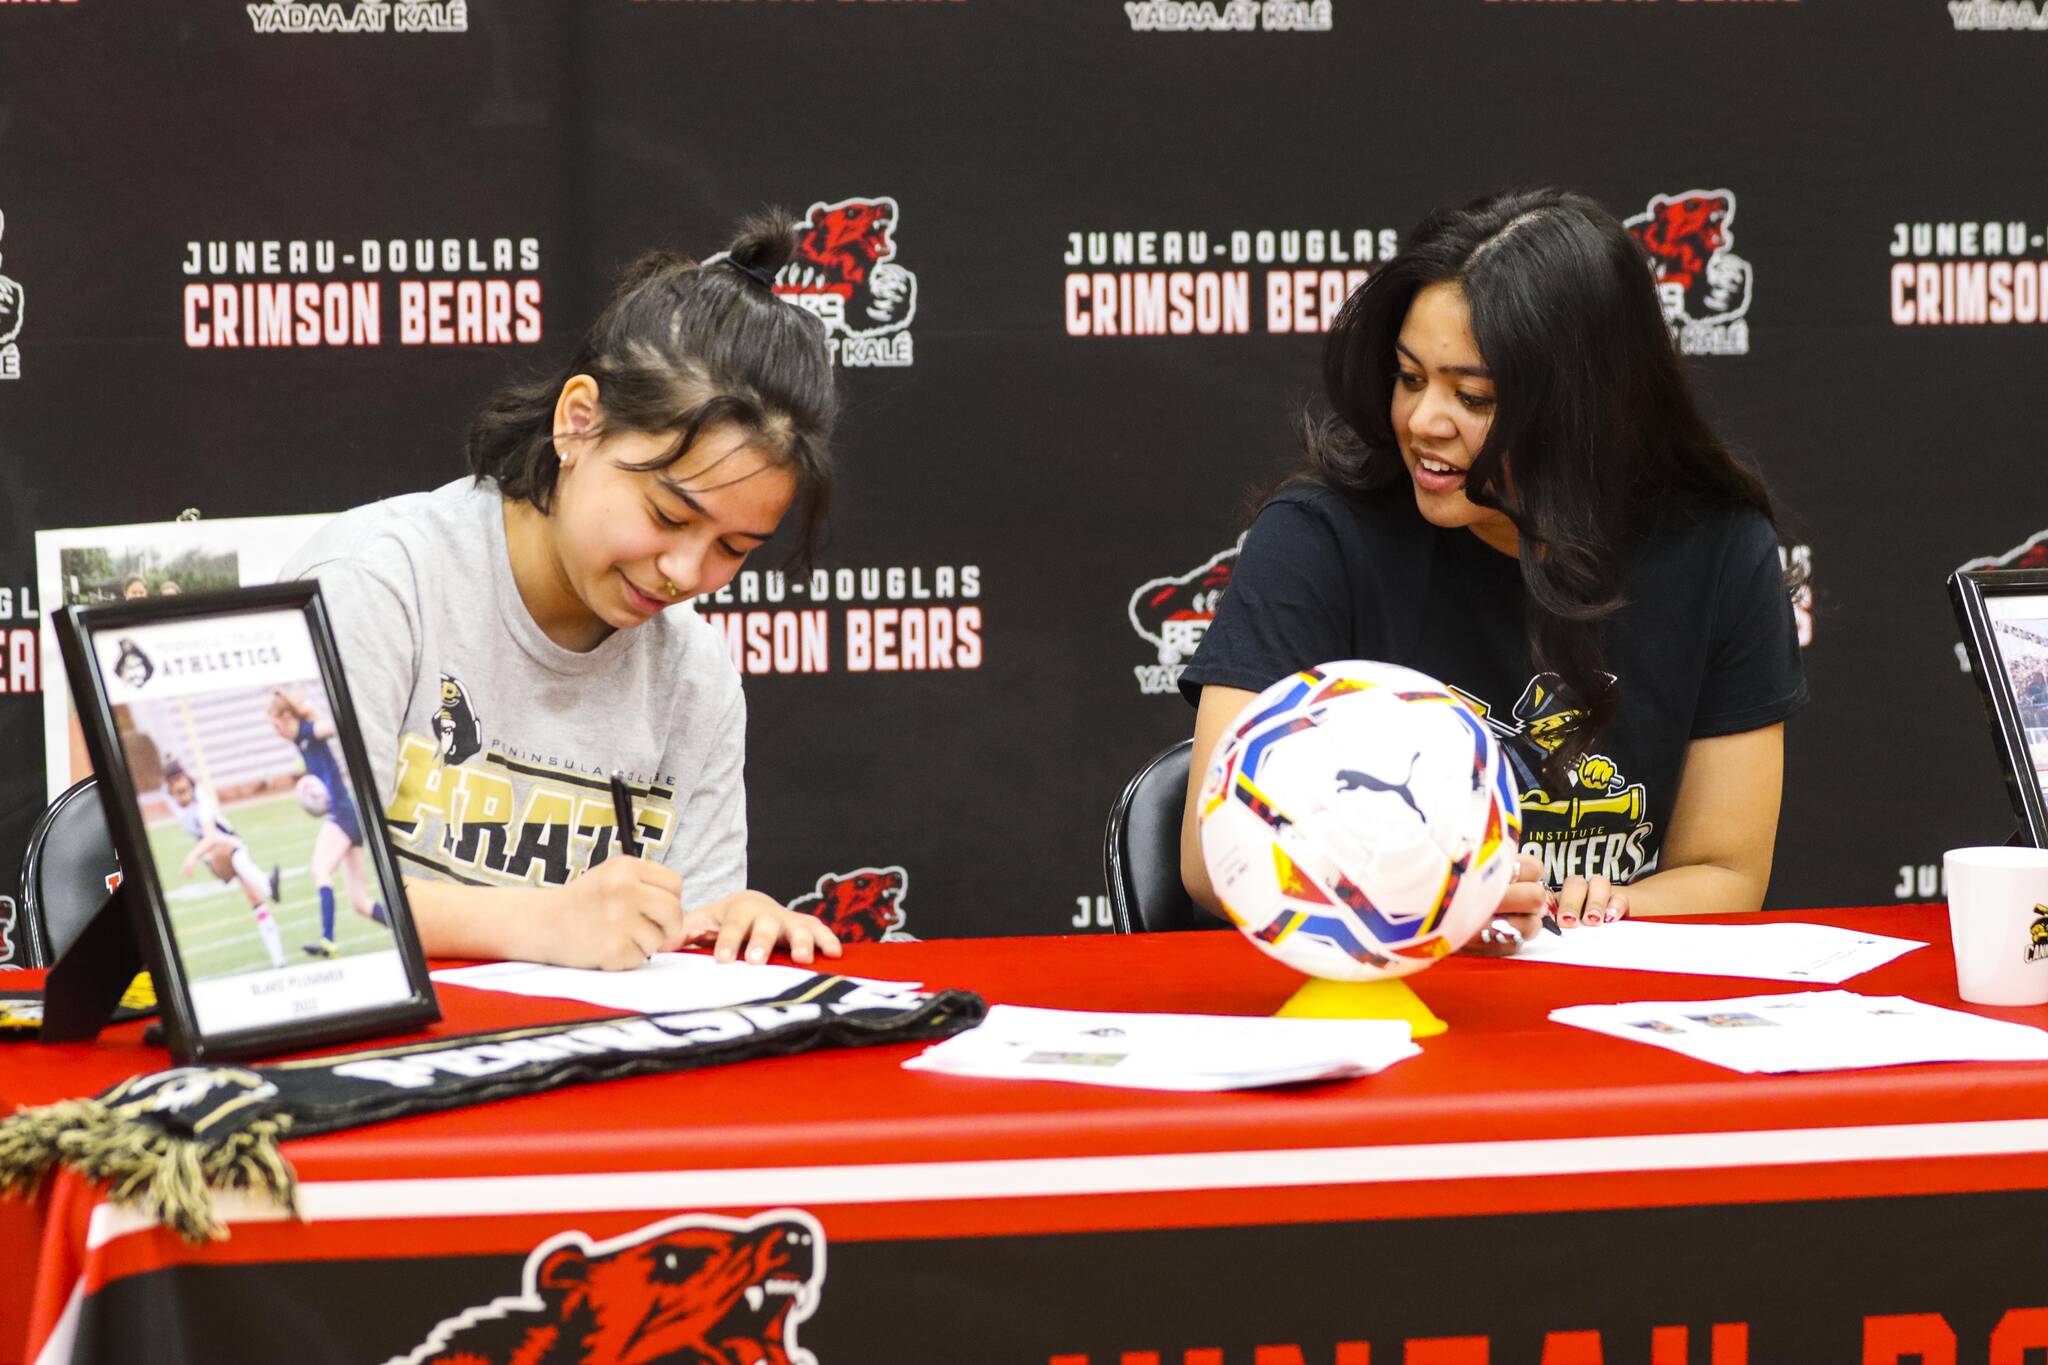 Blake Plummer, left, and Sophia Pugh, both JDHS girls soccer players, sign their letters of intent to play for Peninsula College and the Pratt Institute respectively on May 9, 2022. (Michael S. Lockett / Juneau Empire)